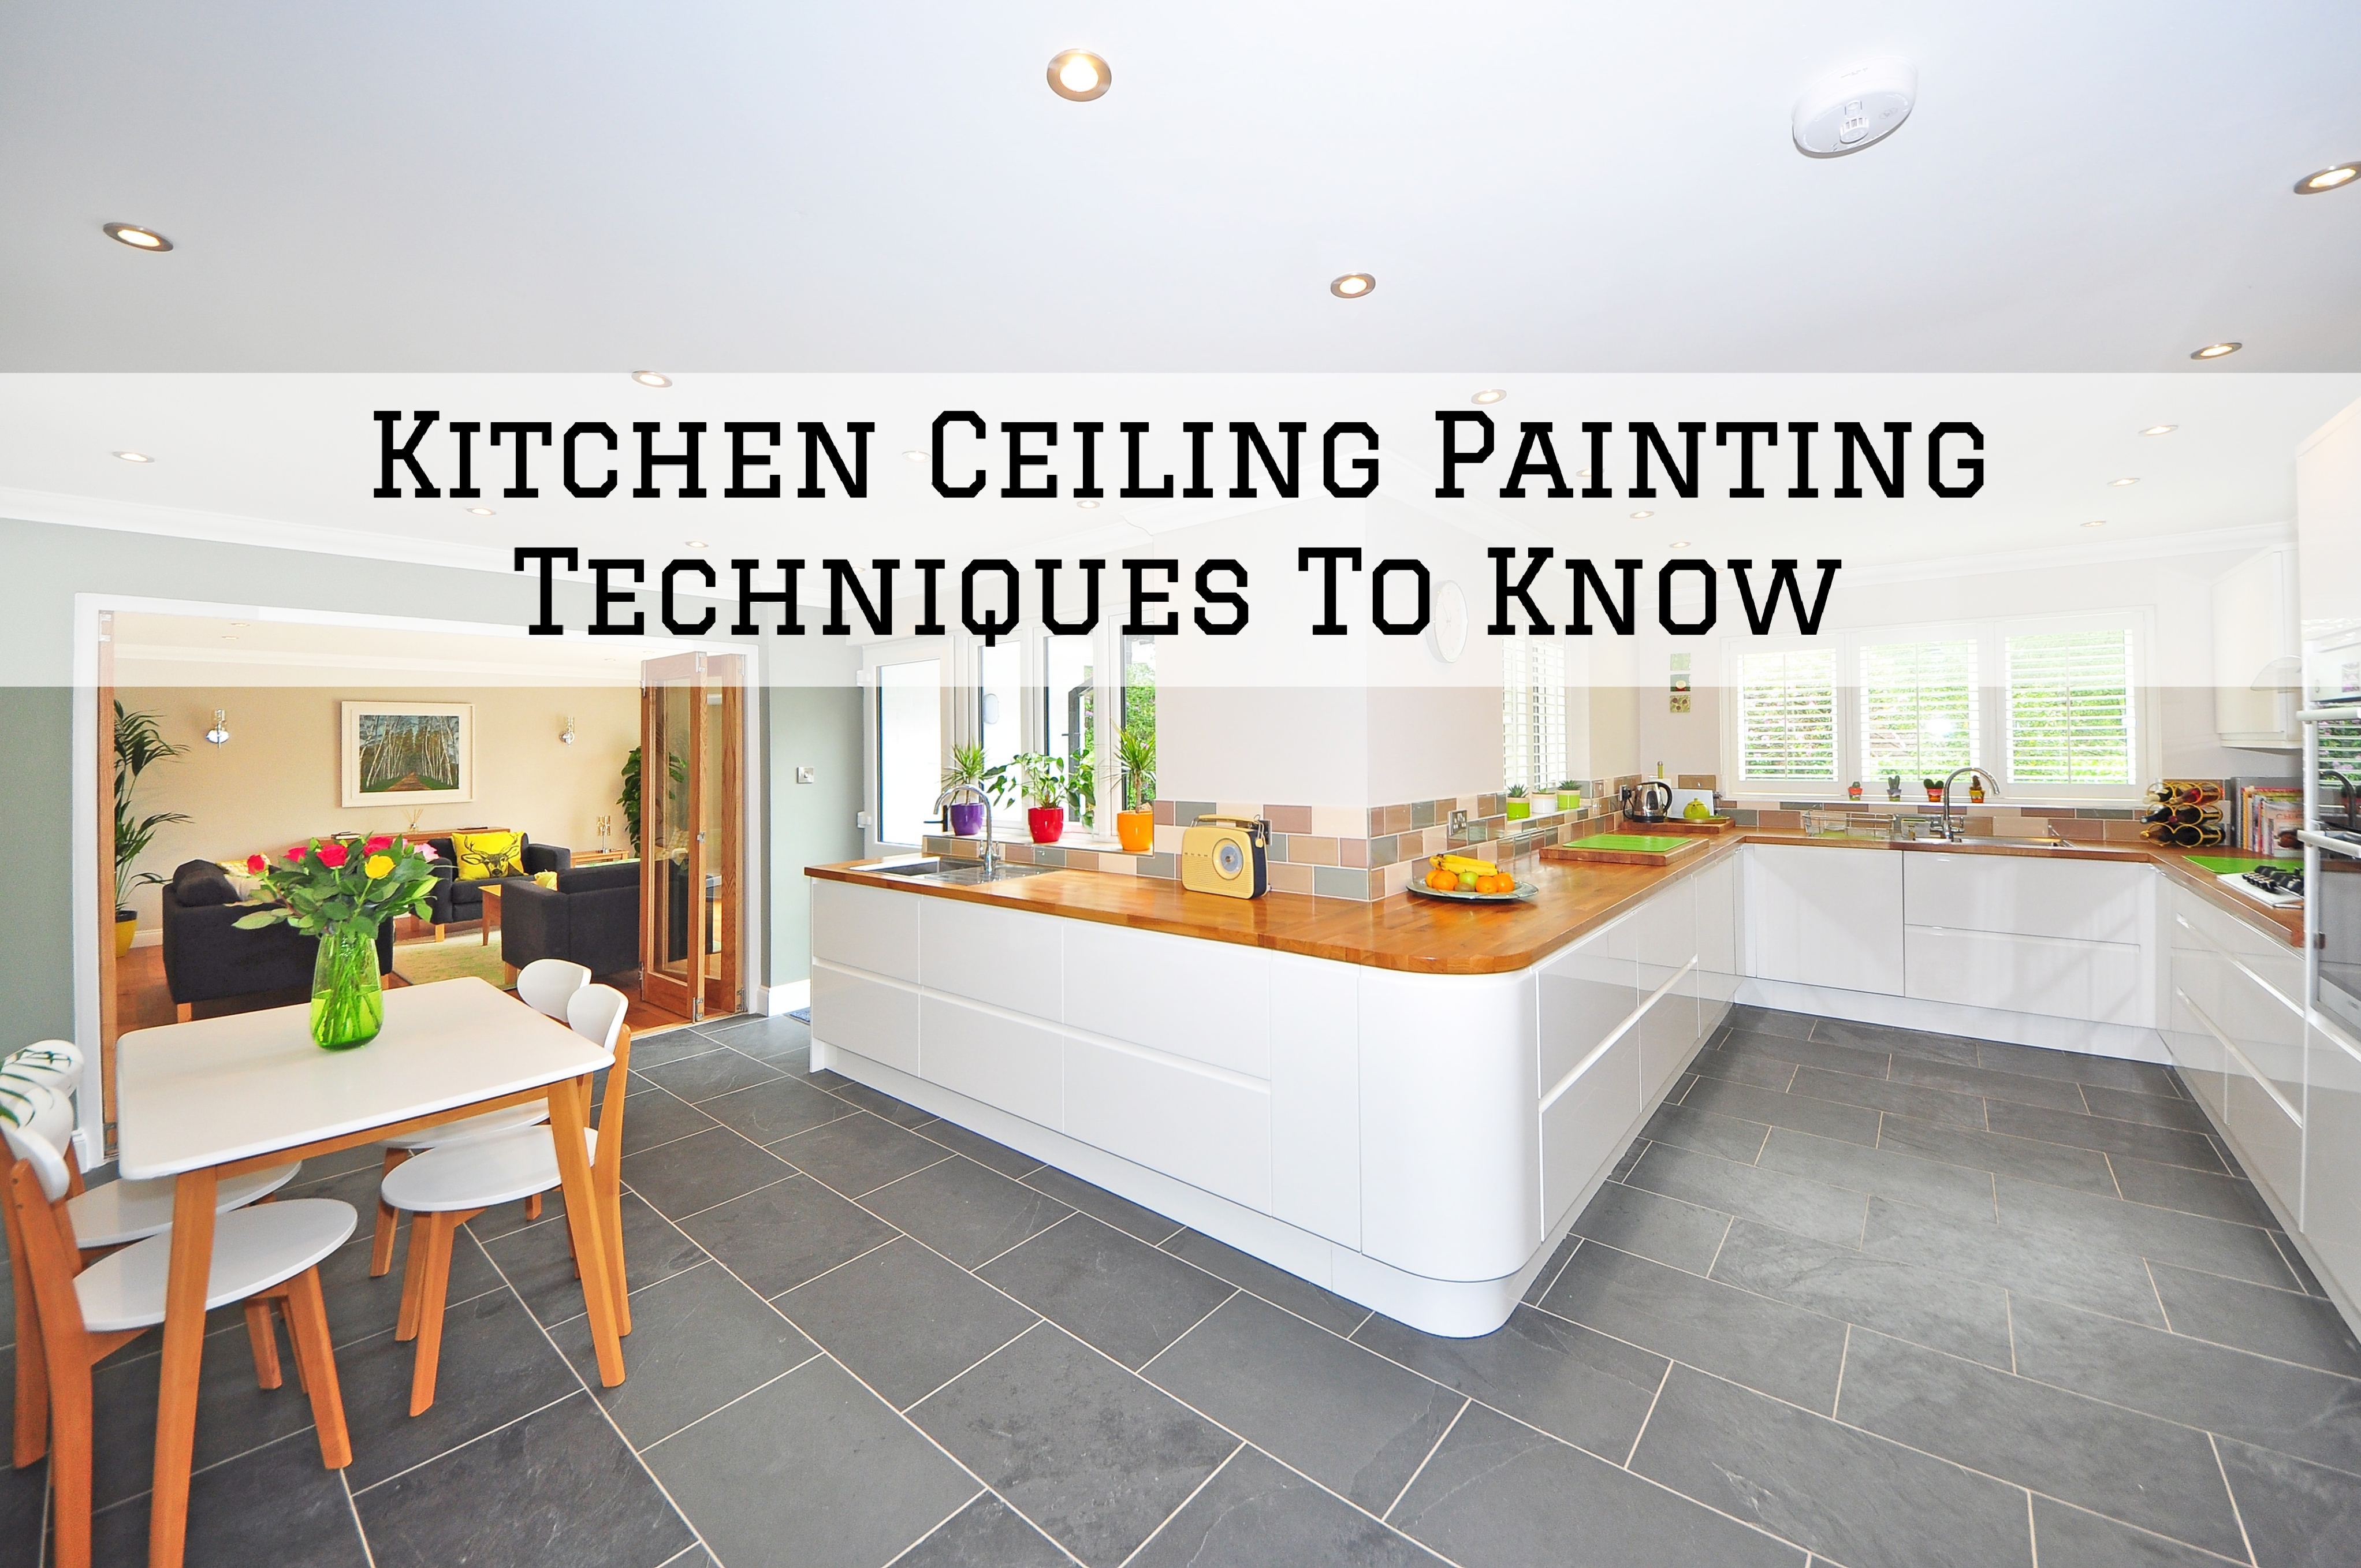 Kitchen Ceiling Painting Techniques To Know